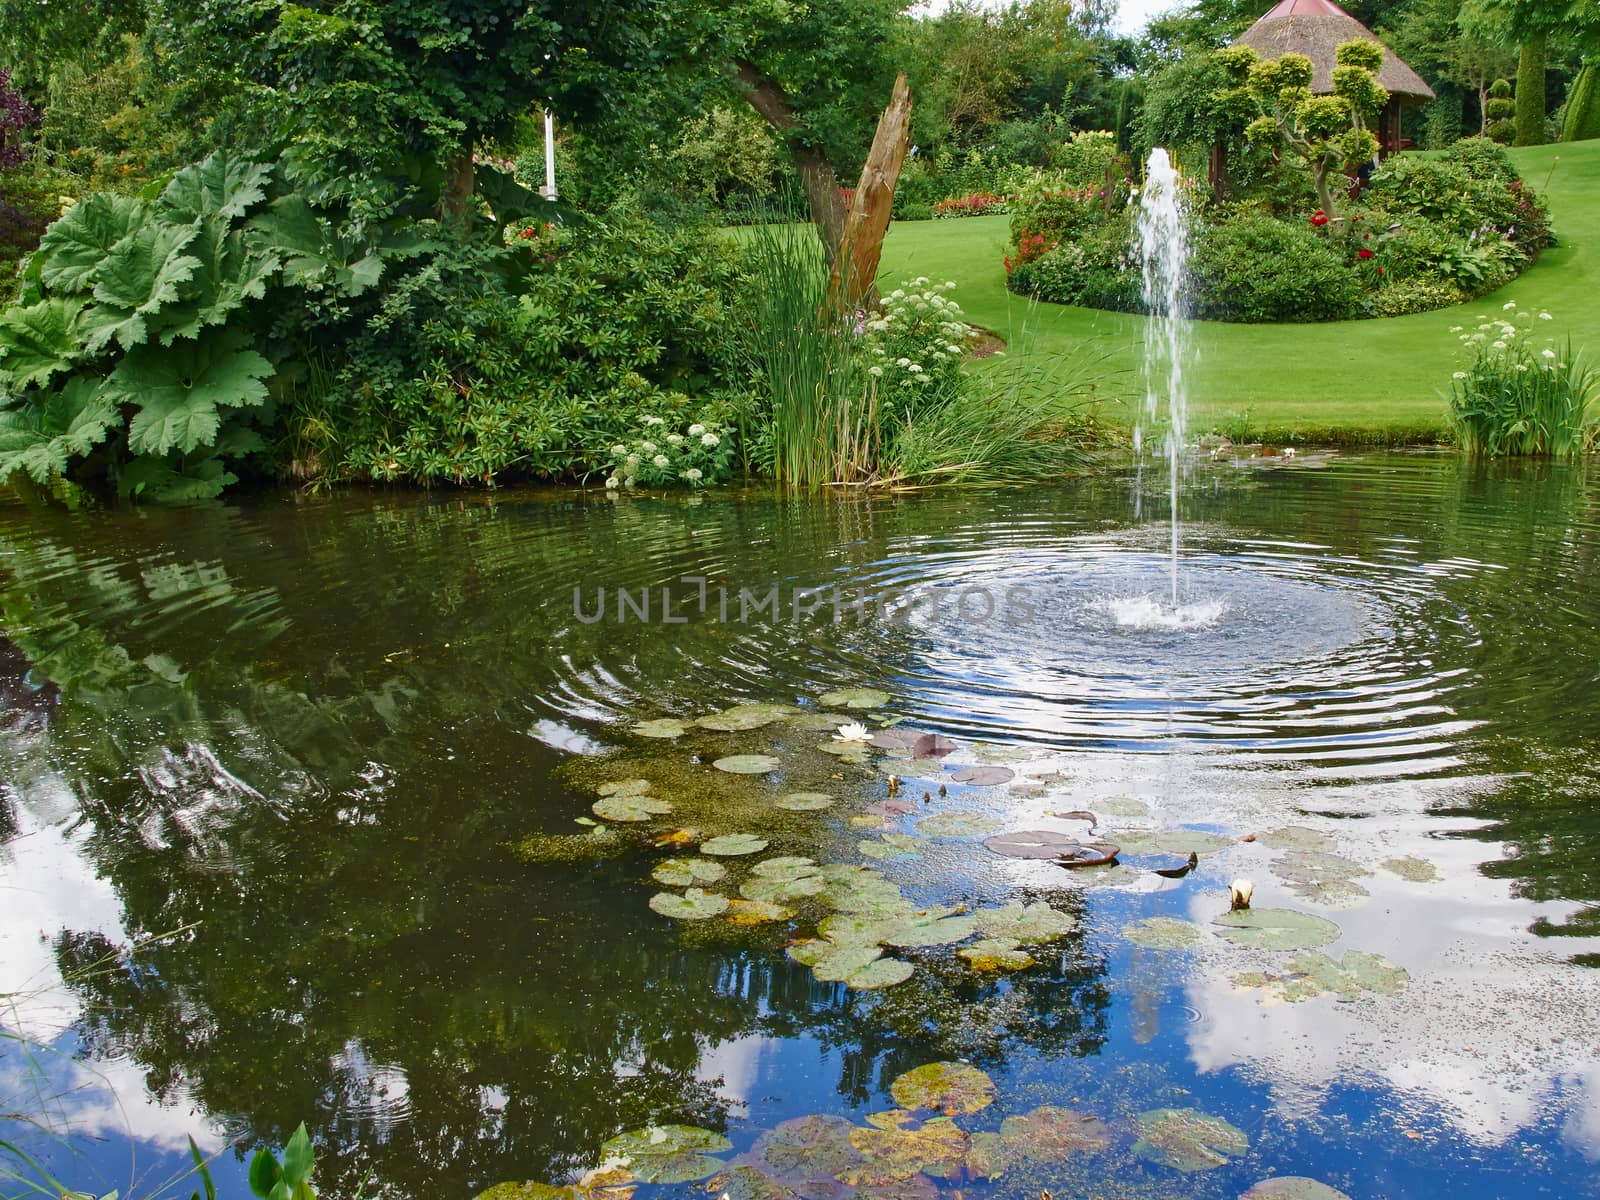 Ornamental pond and water fountain in a garden by Ronyzmbow